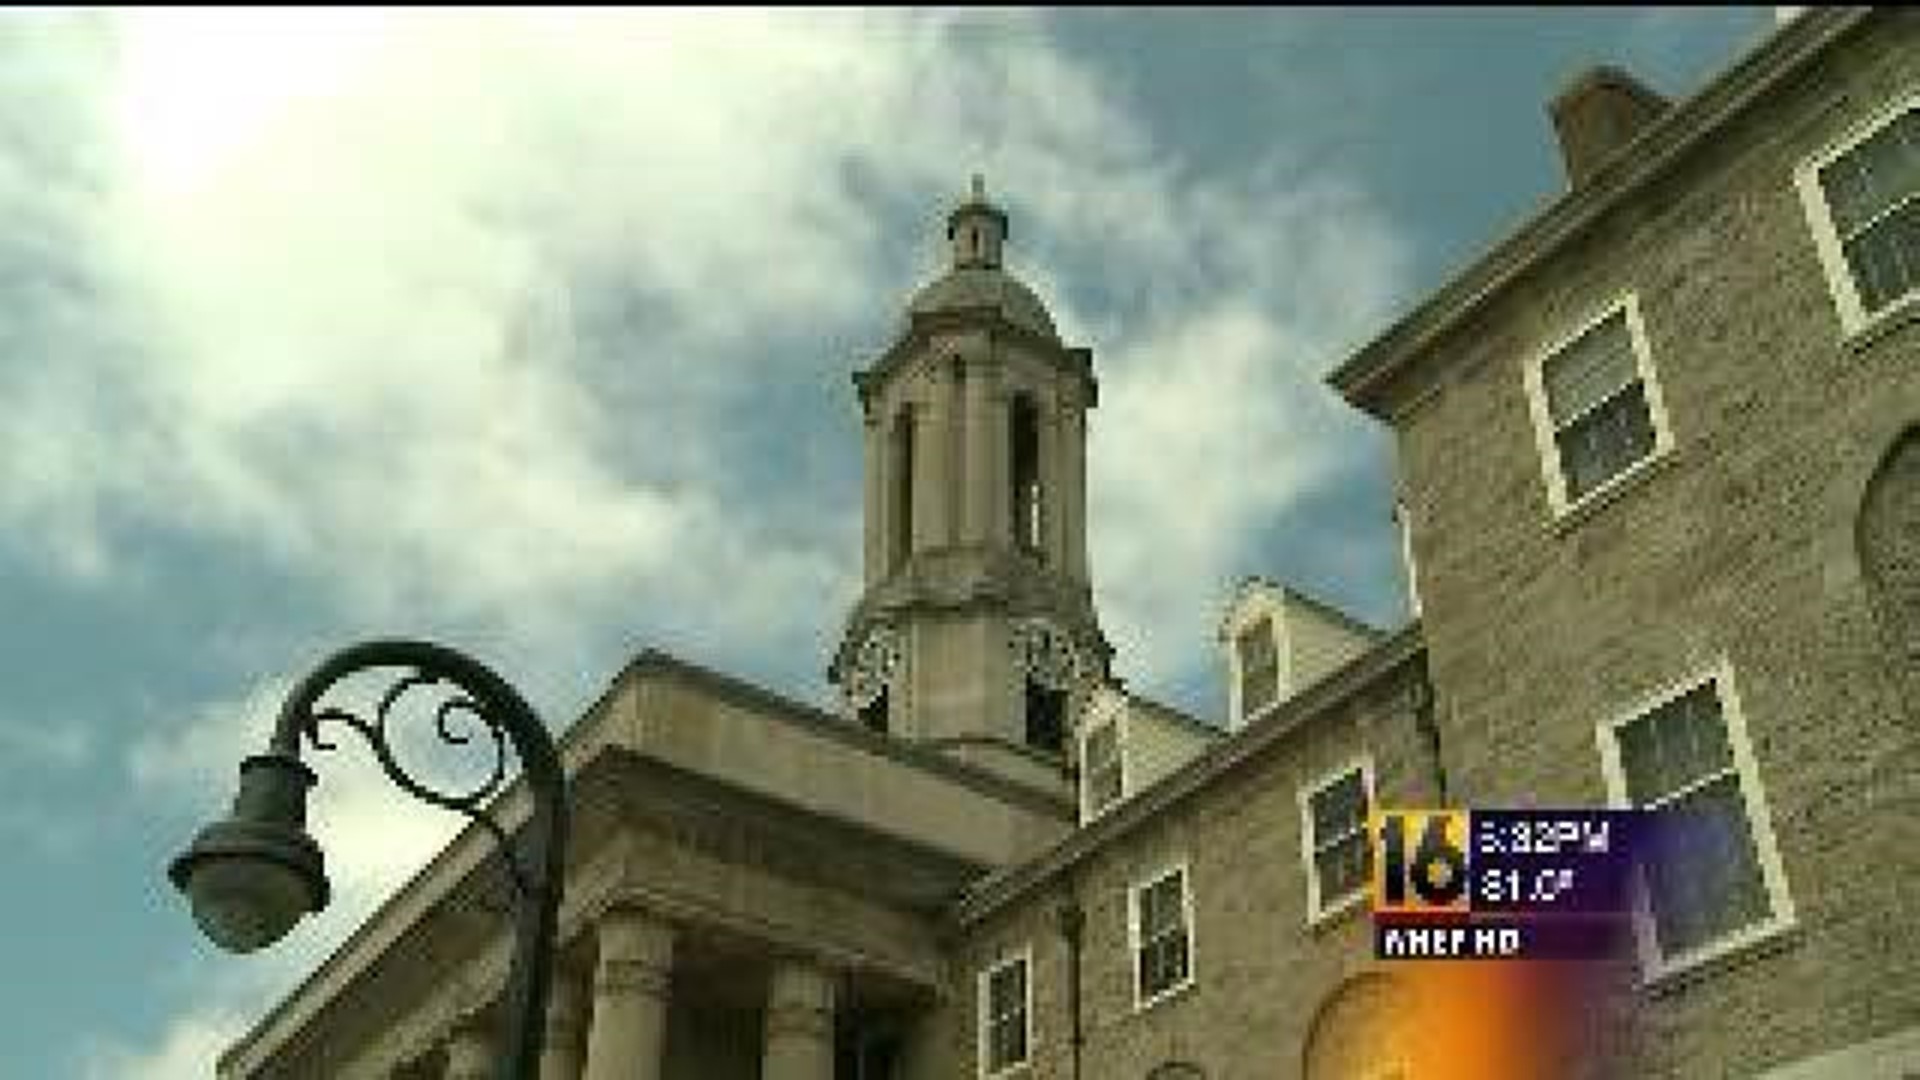 PSU Employees Unhappy with Health Care Requirements